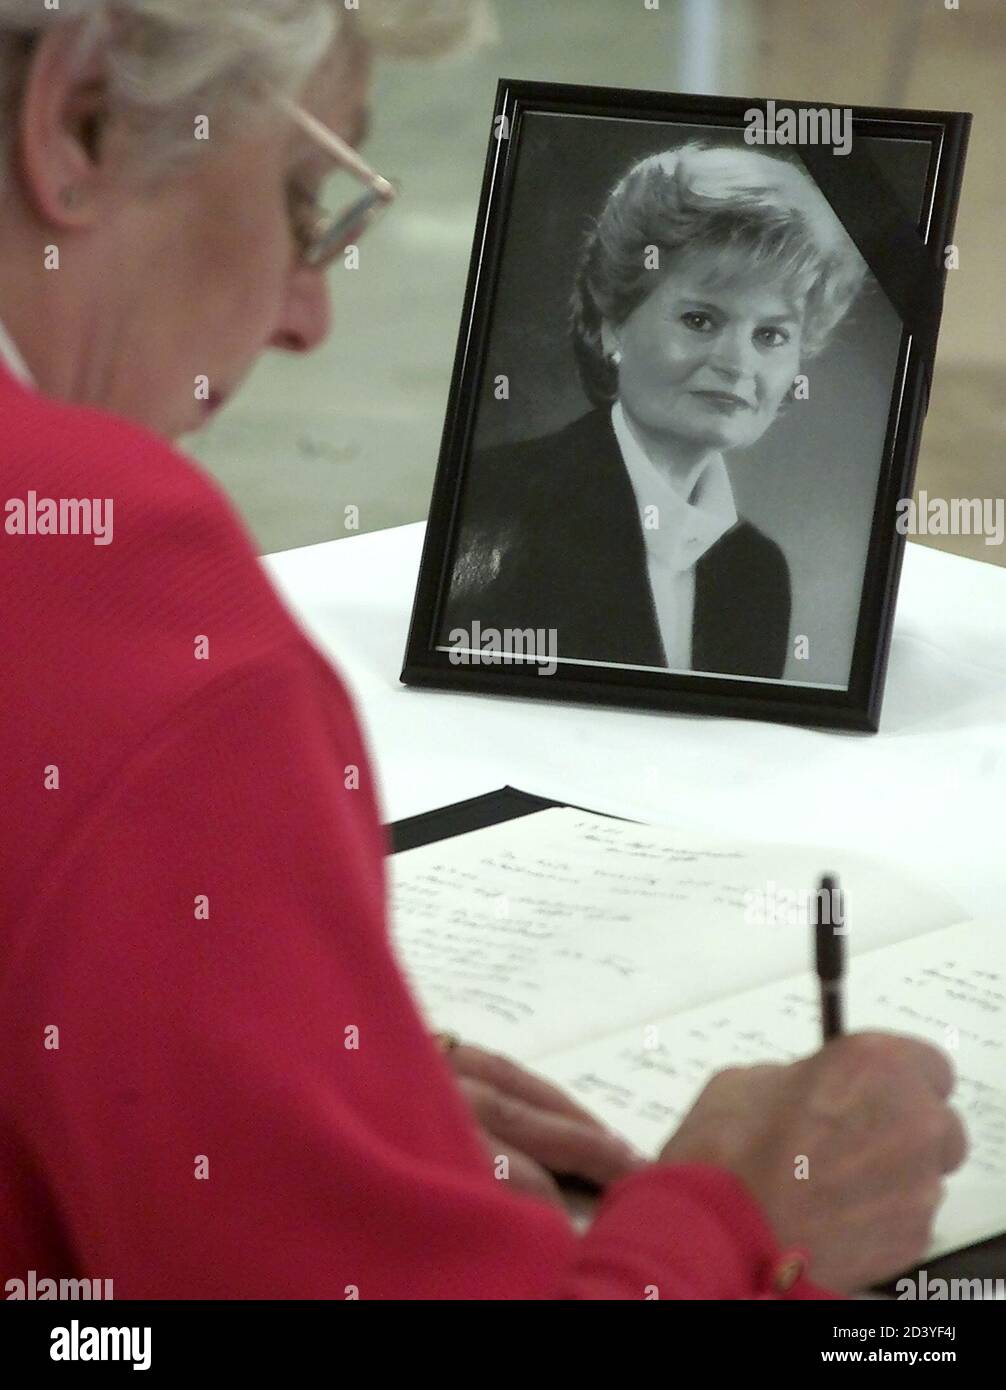 An unidentified woman signs the condolence book for Hannelore Kohl, wife of former German Chancellor Helmut Kohl inside the conservative Christian Democratic Union party headquarters' in Berlin July 8, 2001.  FAB Stock Photo